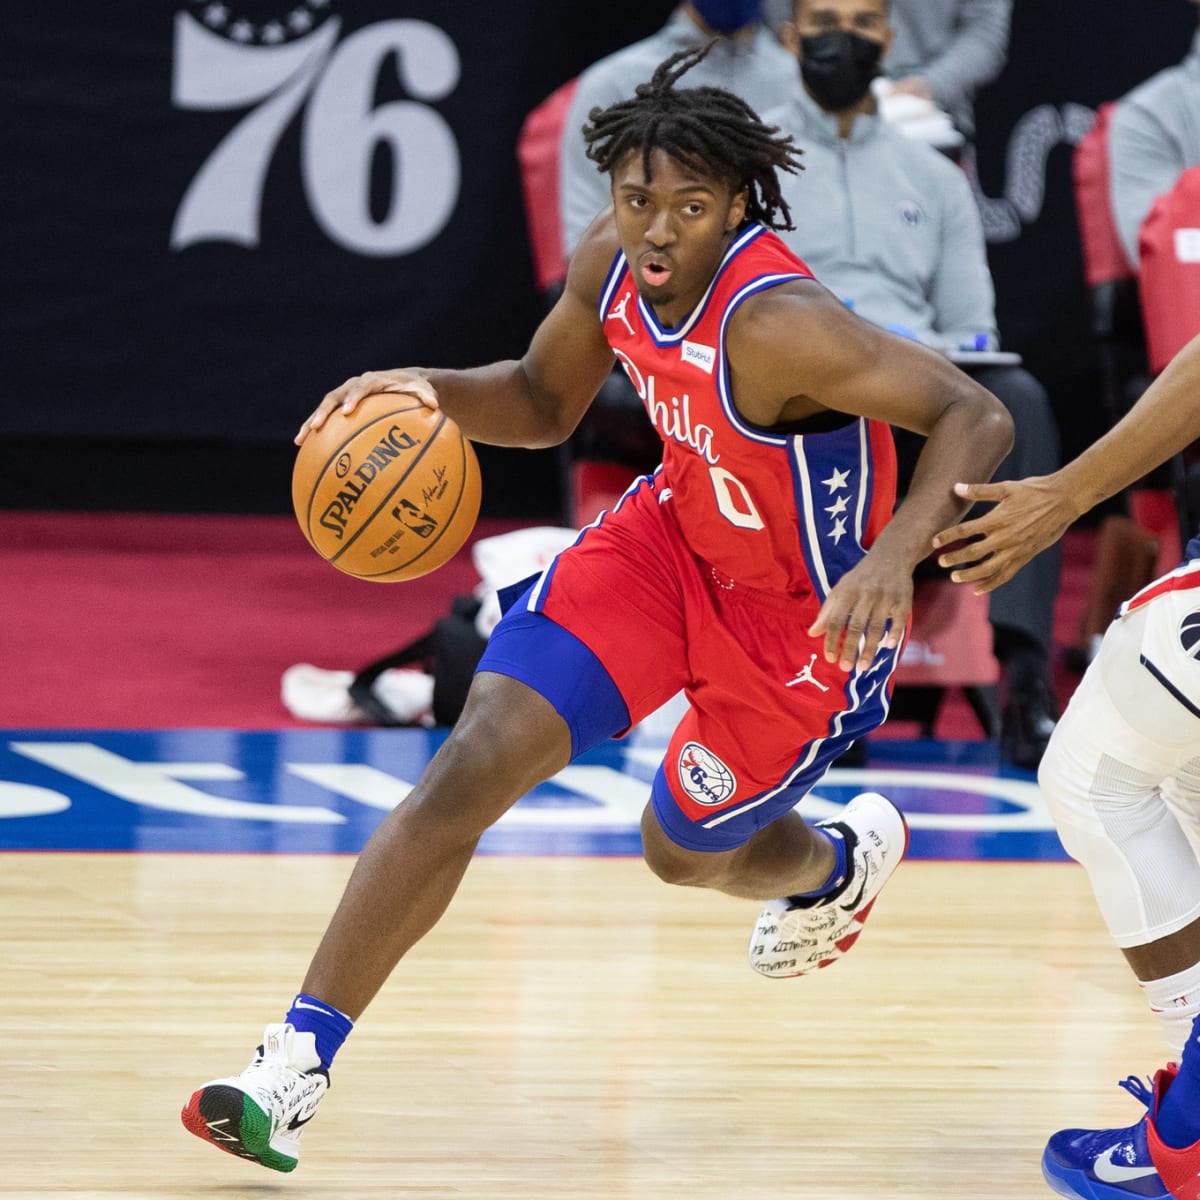 Tyrese Maxey showing he could be the steal of the draft as he